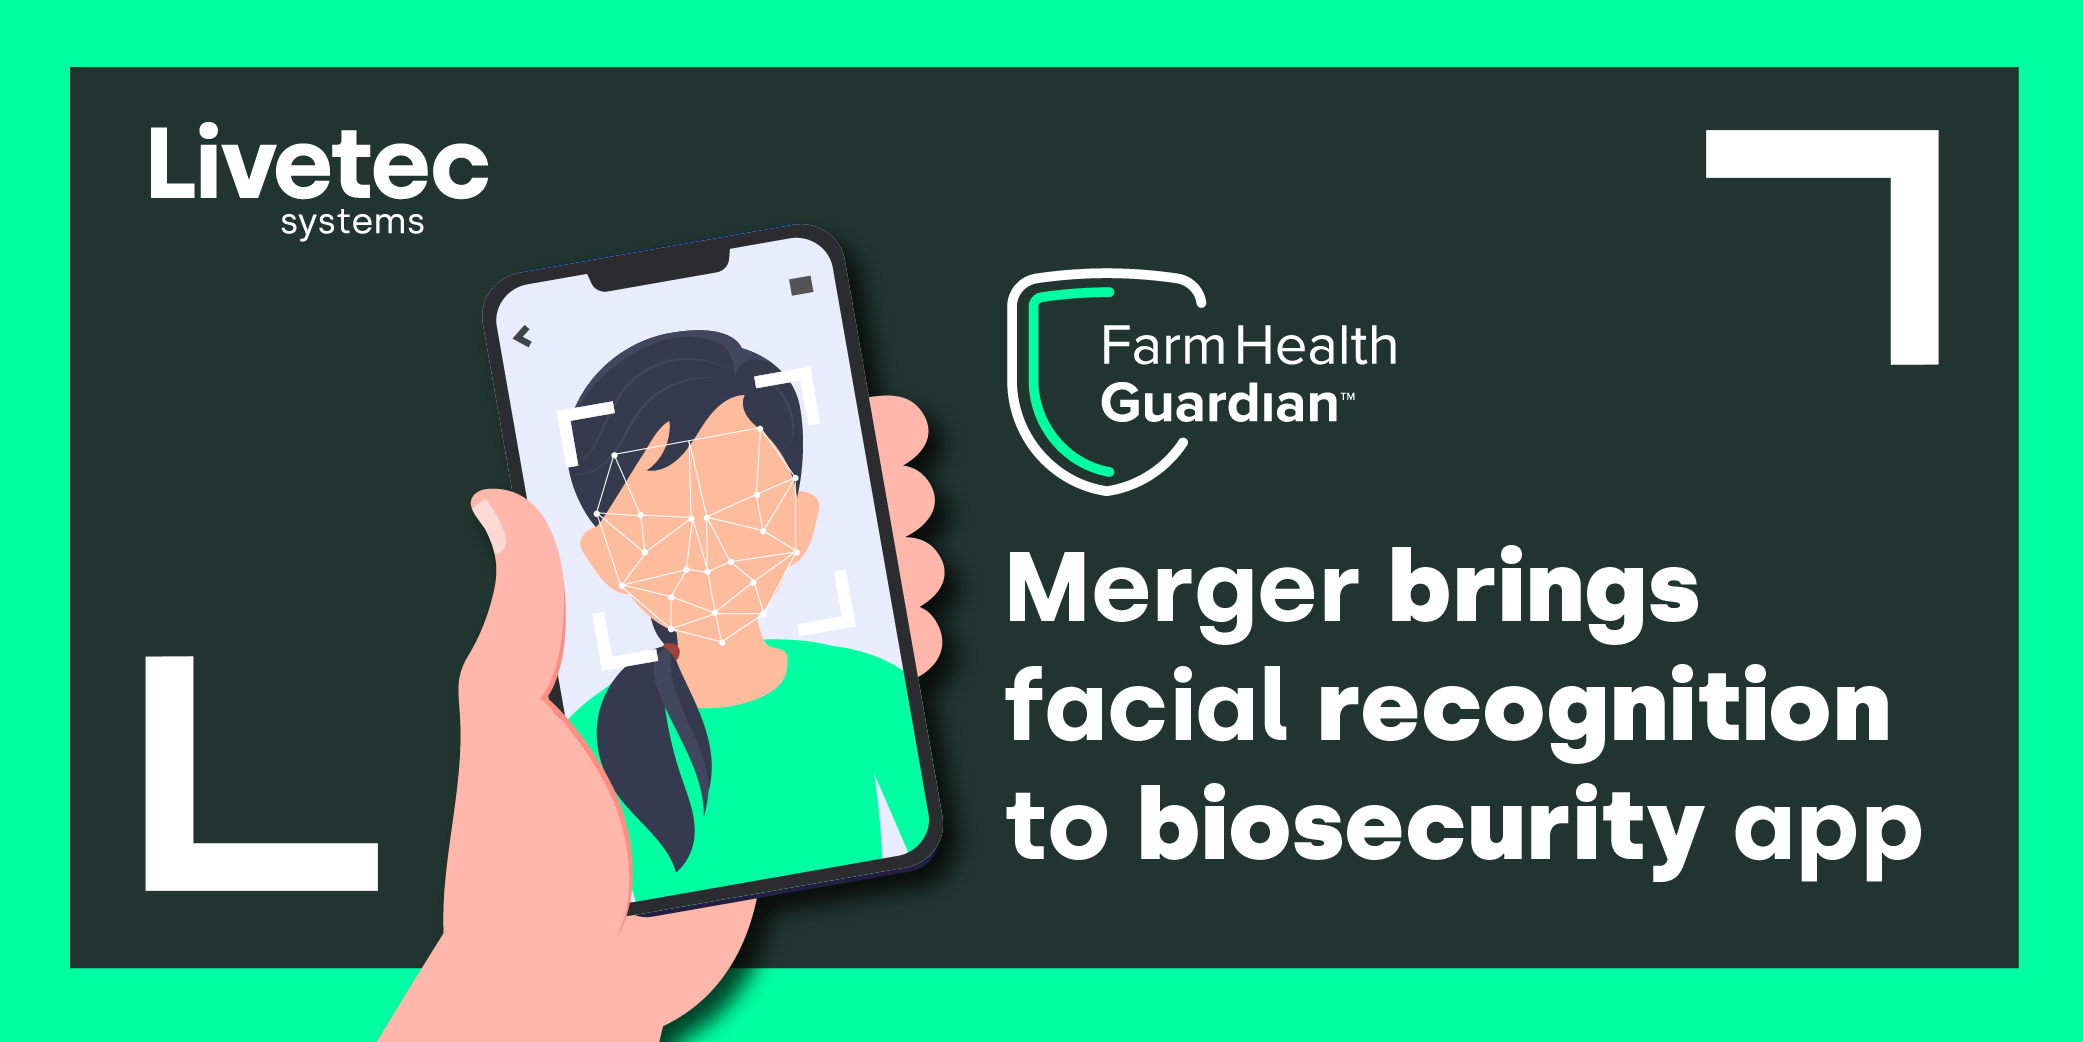 Merger brings facial recognition to biosecurity app